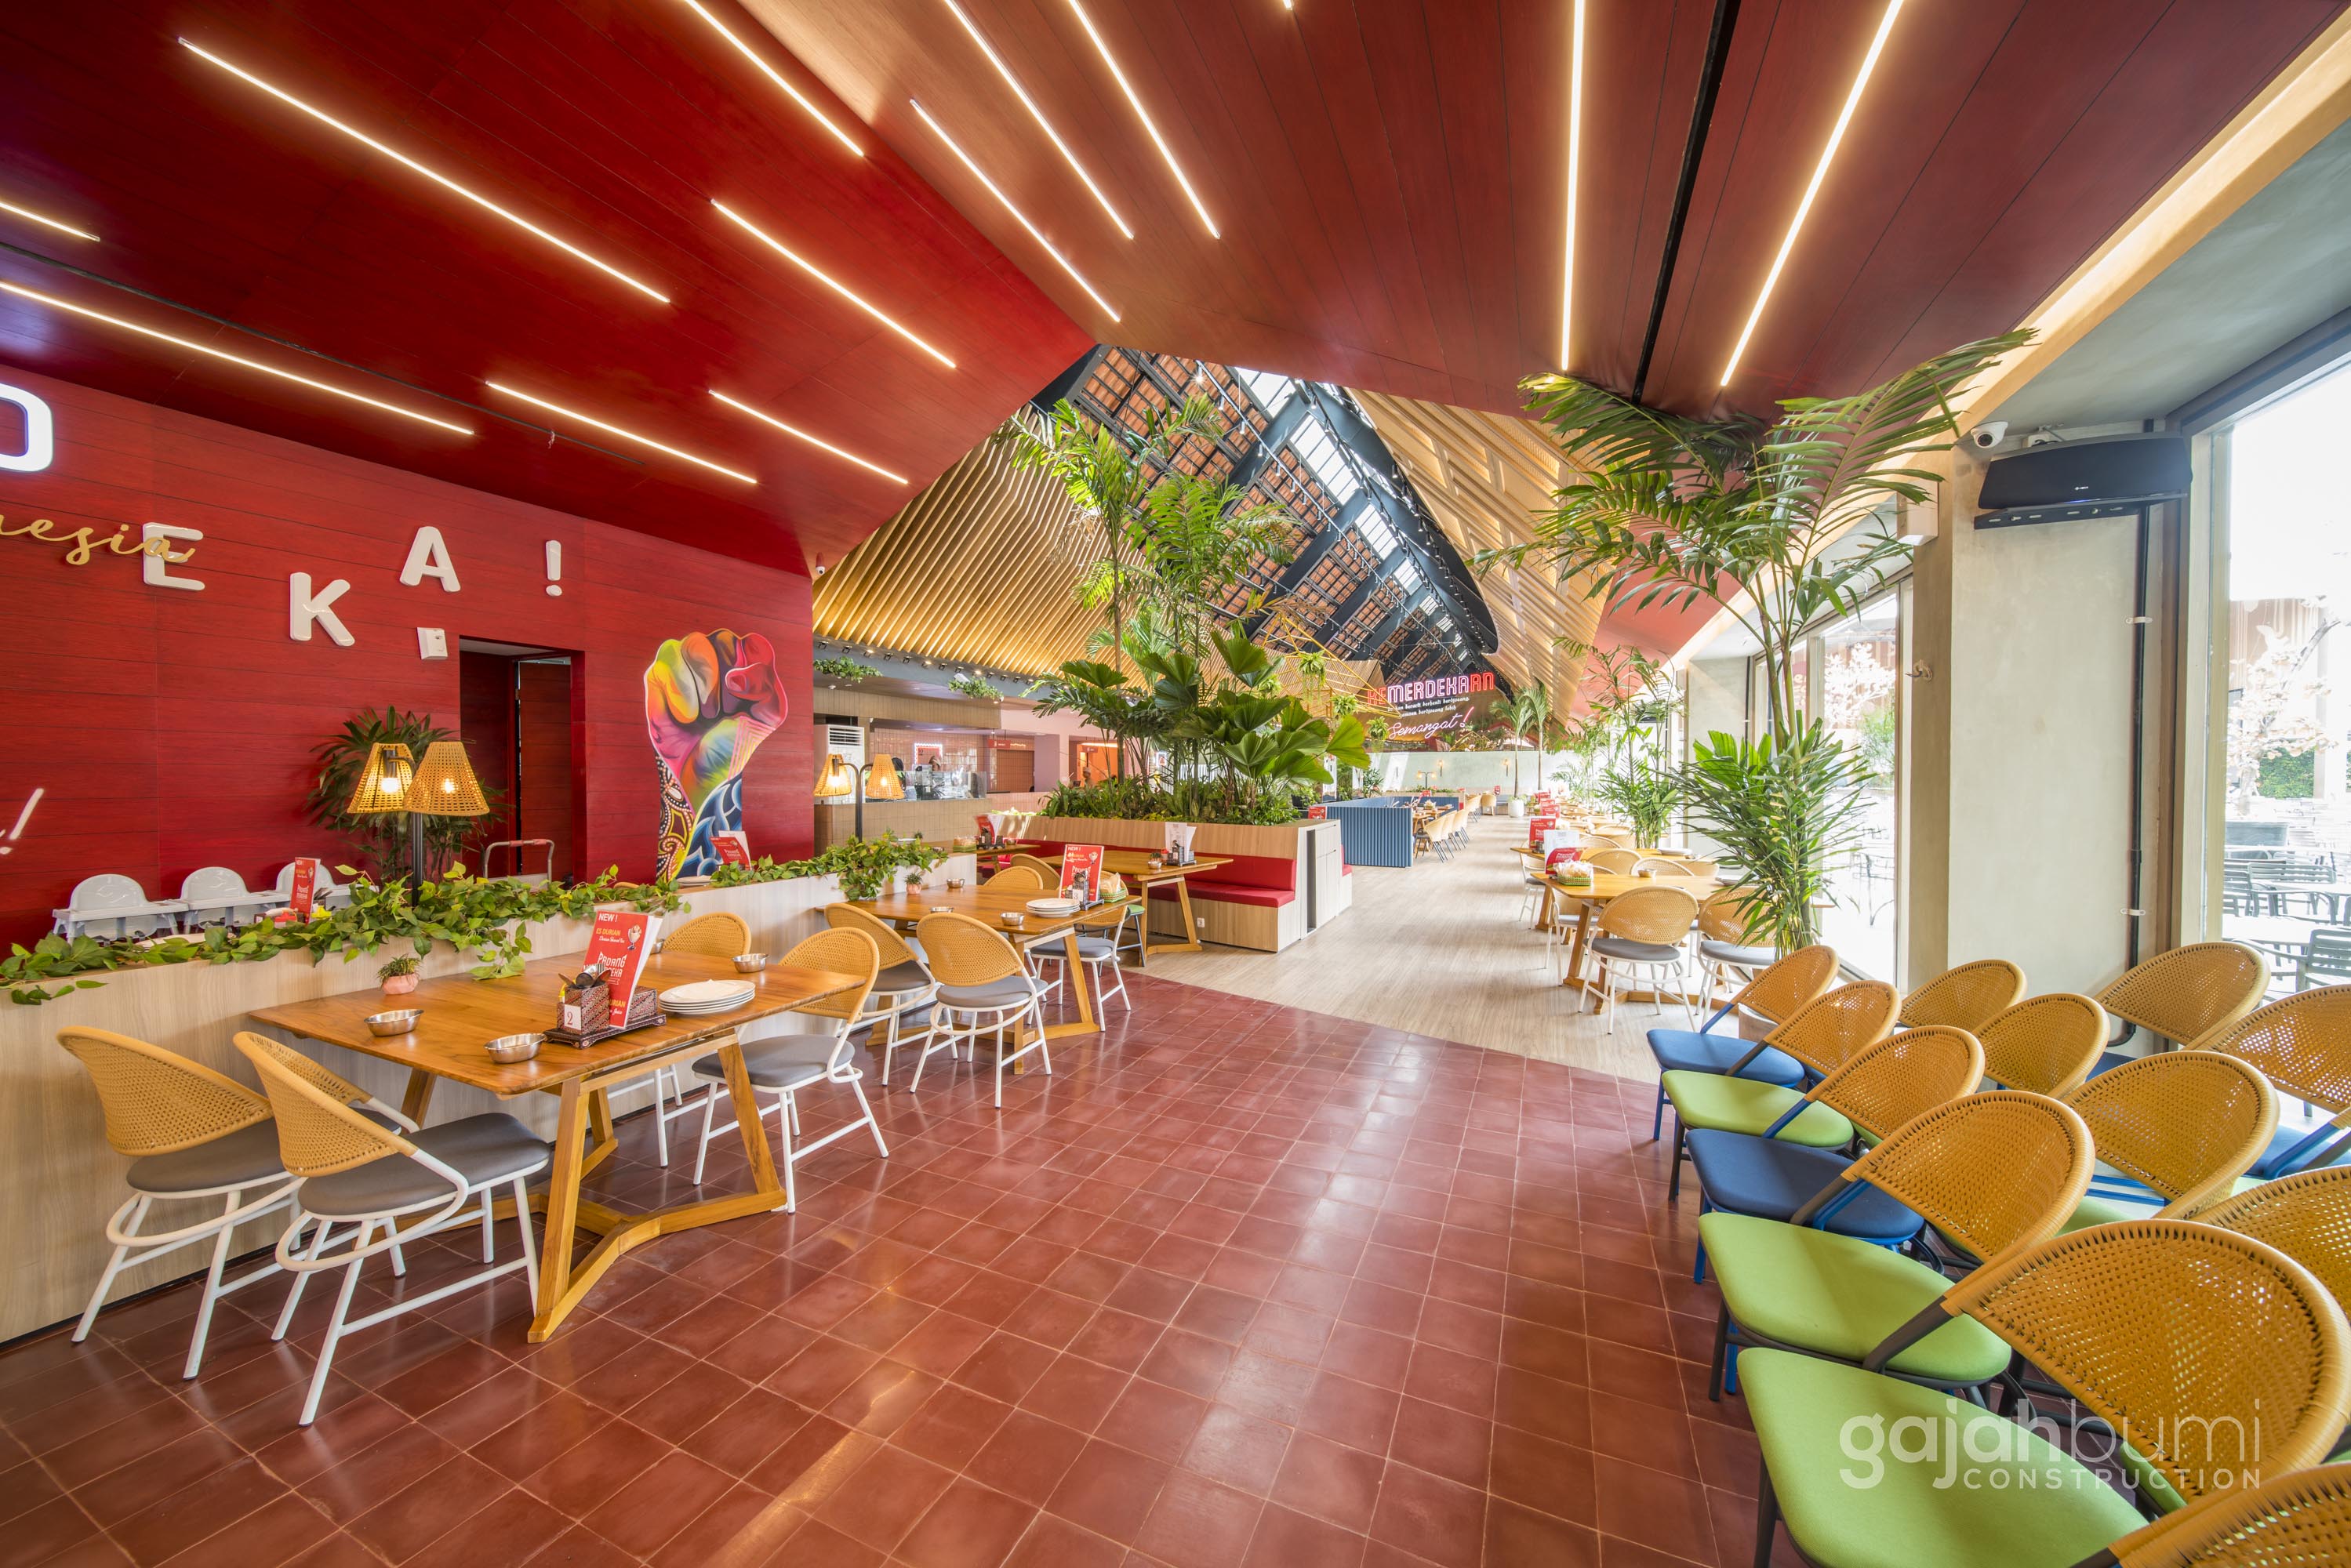 Restaurant Design Ideas With Red Color